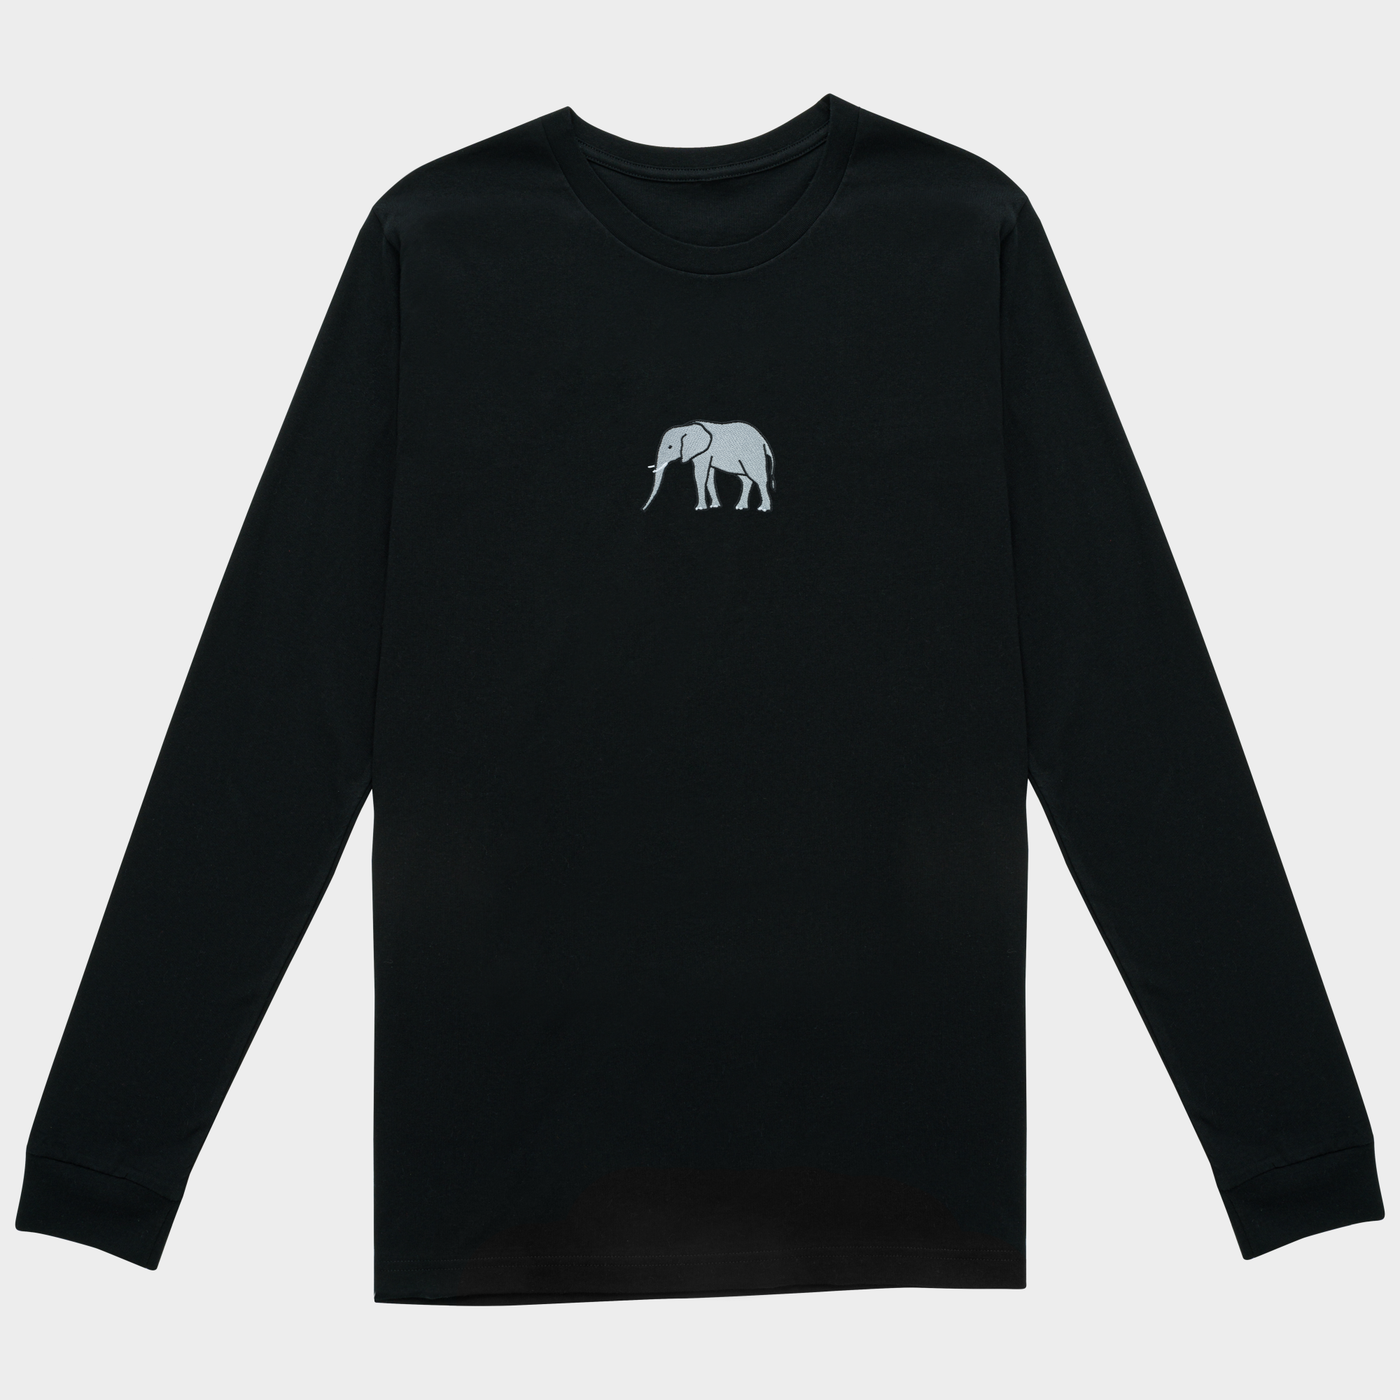 Bobby's Planet Men's Embroidered Elephant Long Sleeve Shirt from African Animals Collection in Black Color#color_black